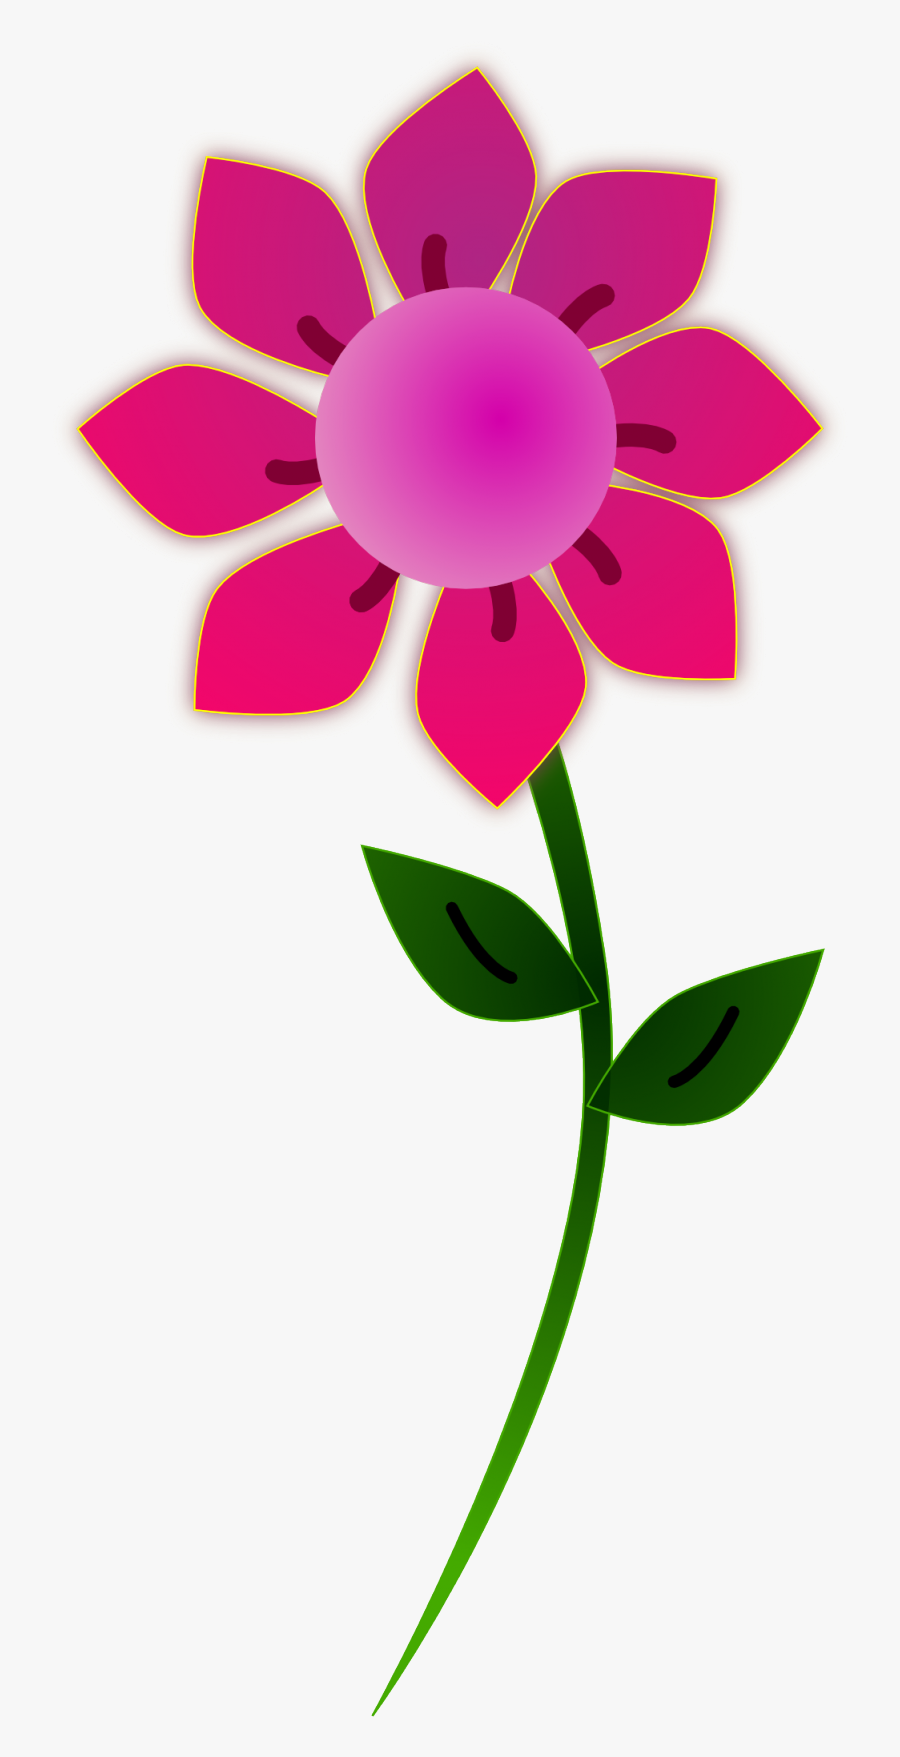 Light Pink Flowers Clip Art Pink And Green Flower Clip - Flower Clipart Png, Transparent Clipart